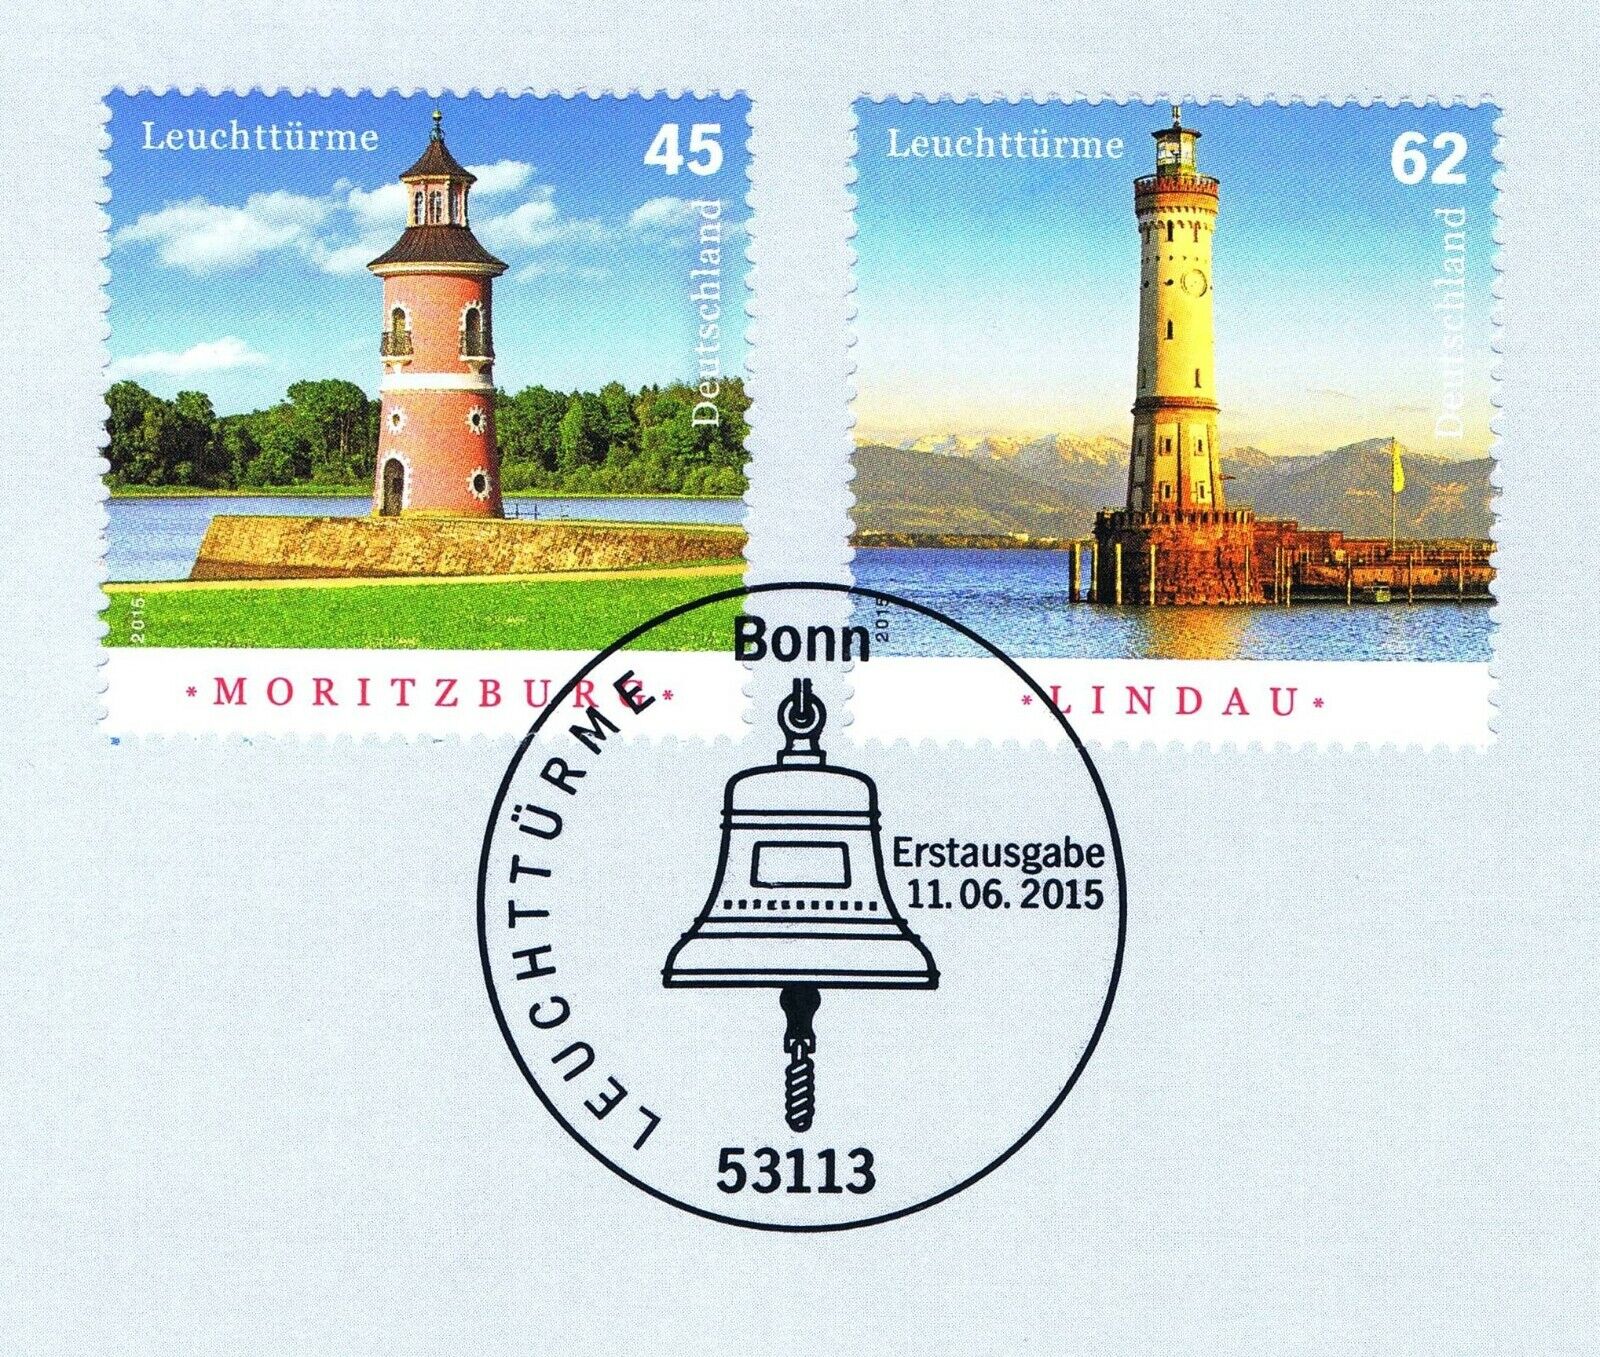 Frg 2015: Lighthouses No. 3156 +3157 With Bonner First Day Postmark! 20-10